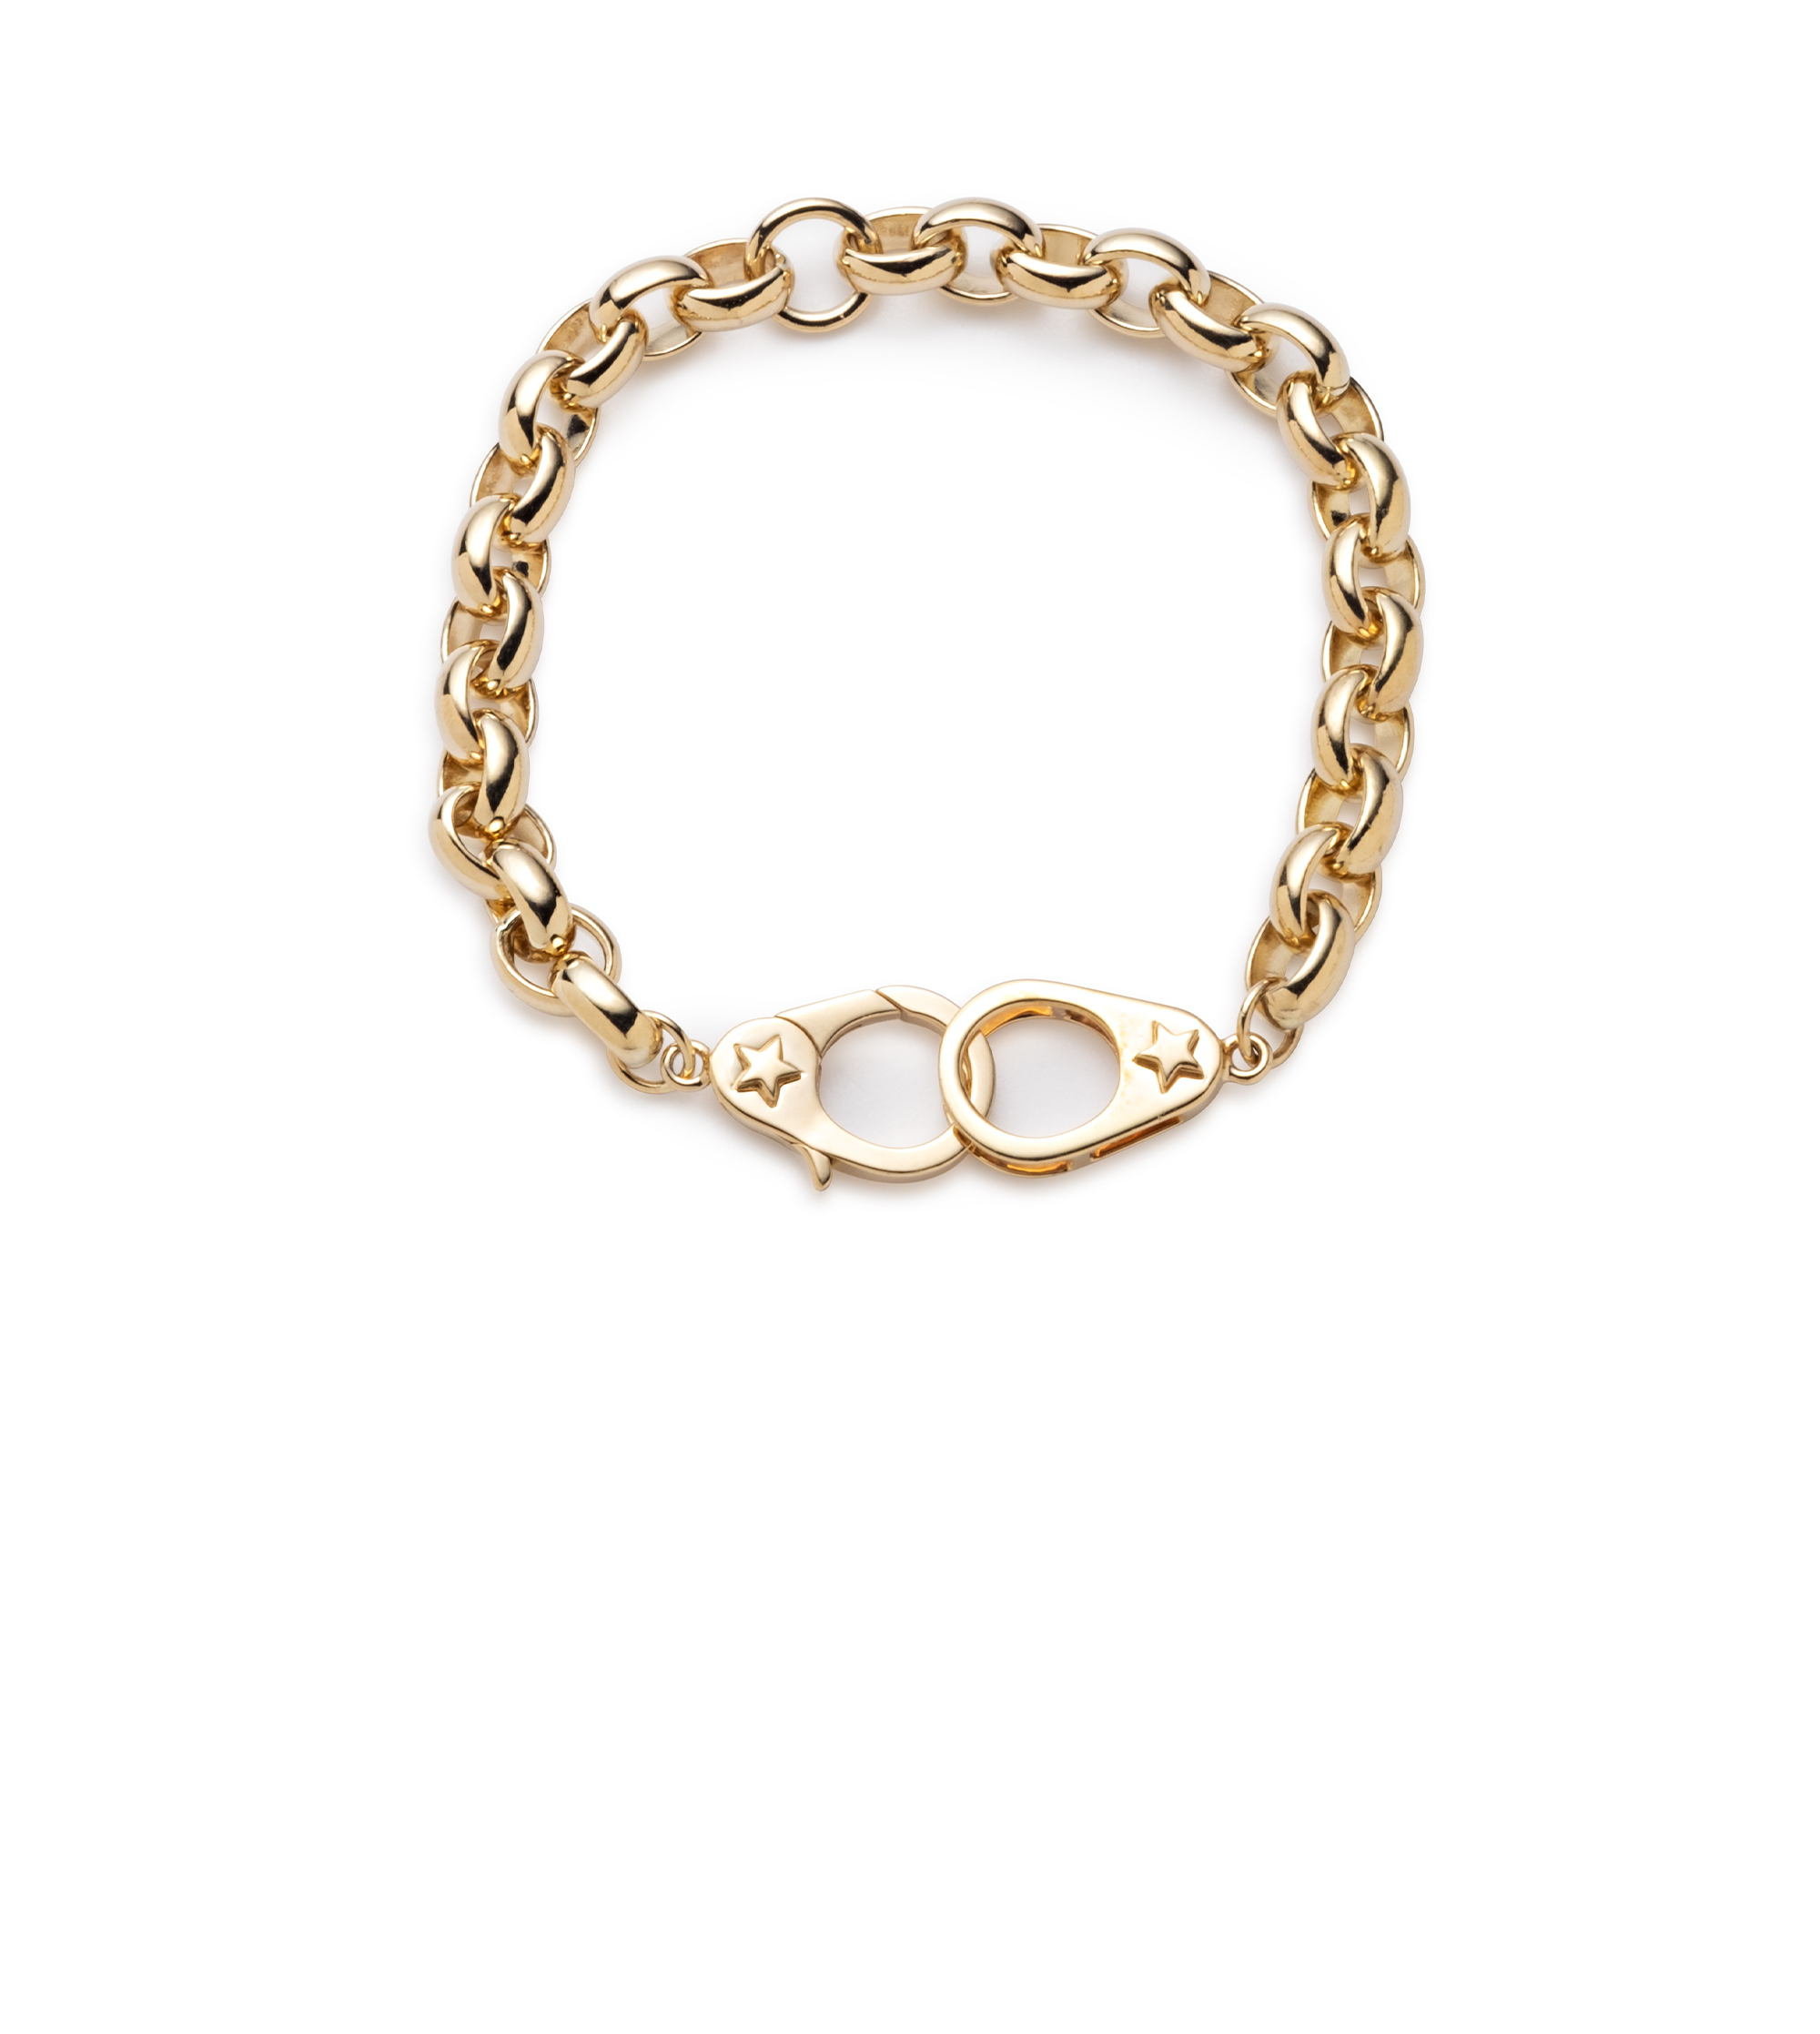 Rose Gold Plated Sterling Silver 7 Inch Belcher Chain Bracelet w Bead  Slider Clasp | Jewellerybox.co.uk